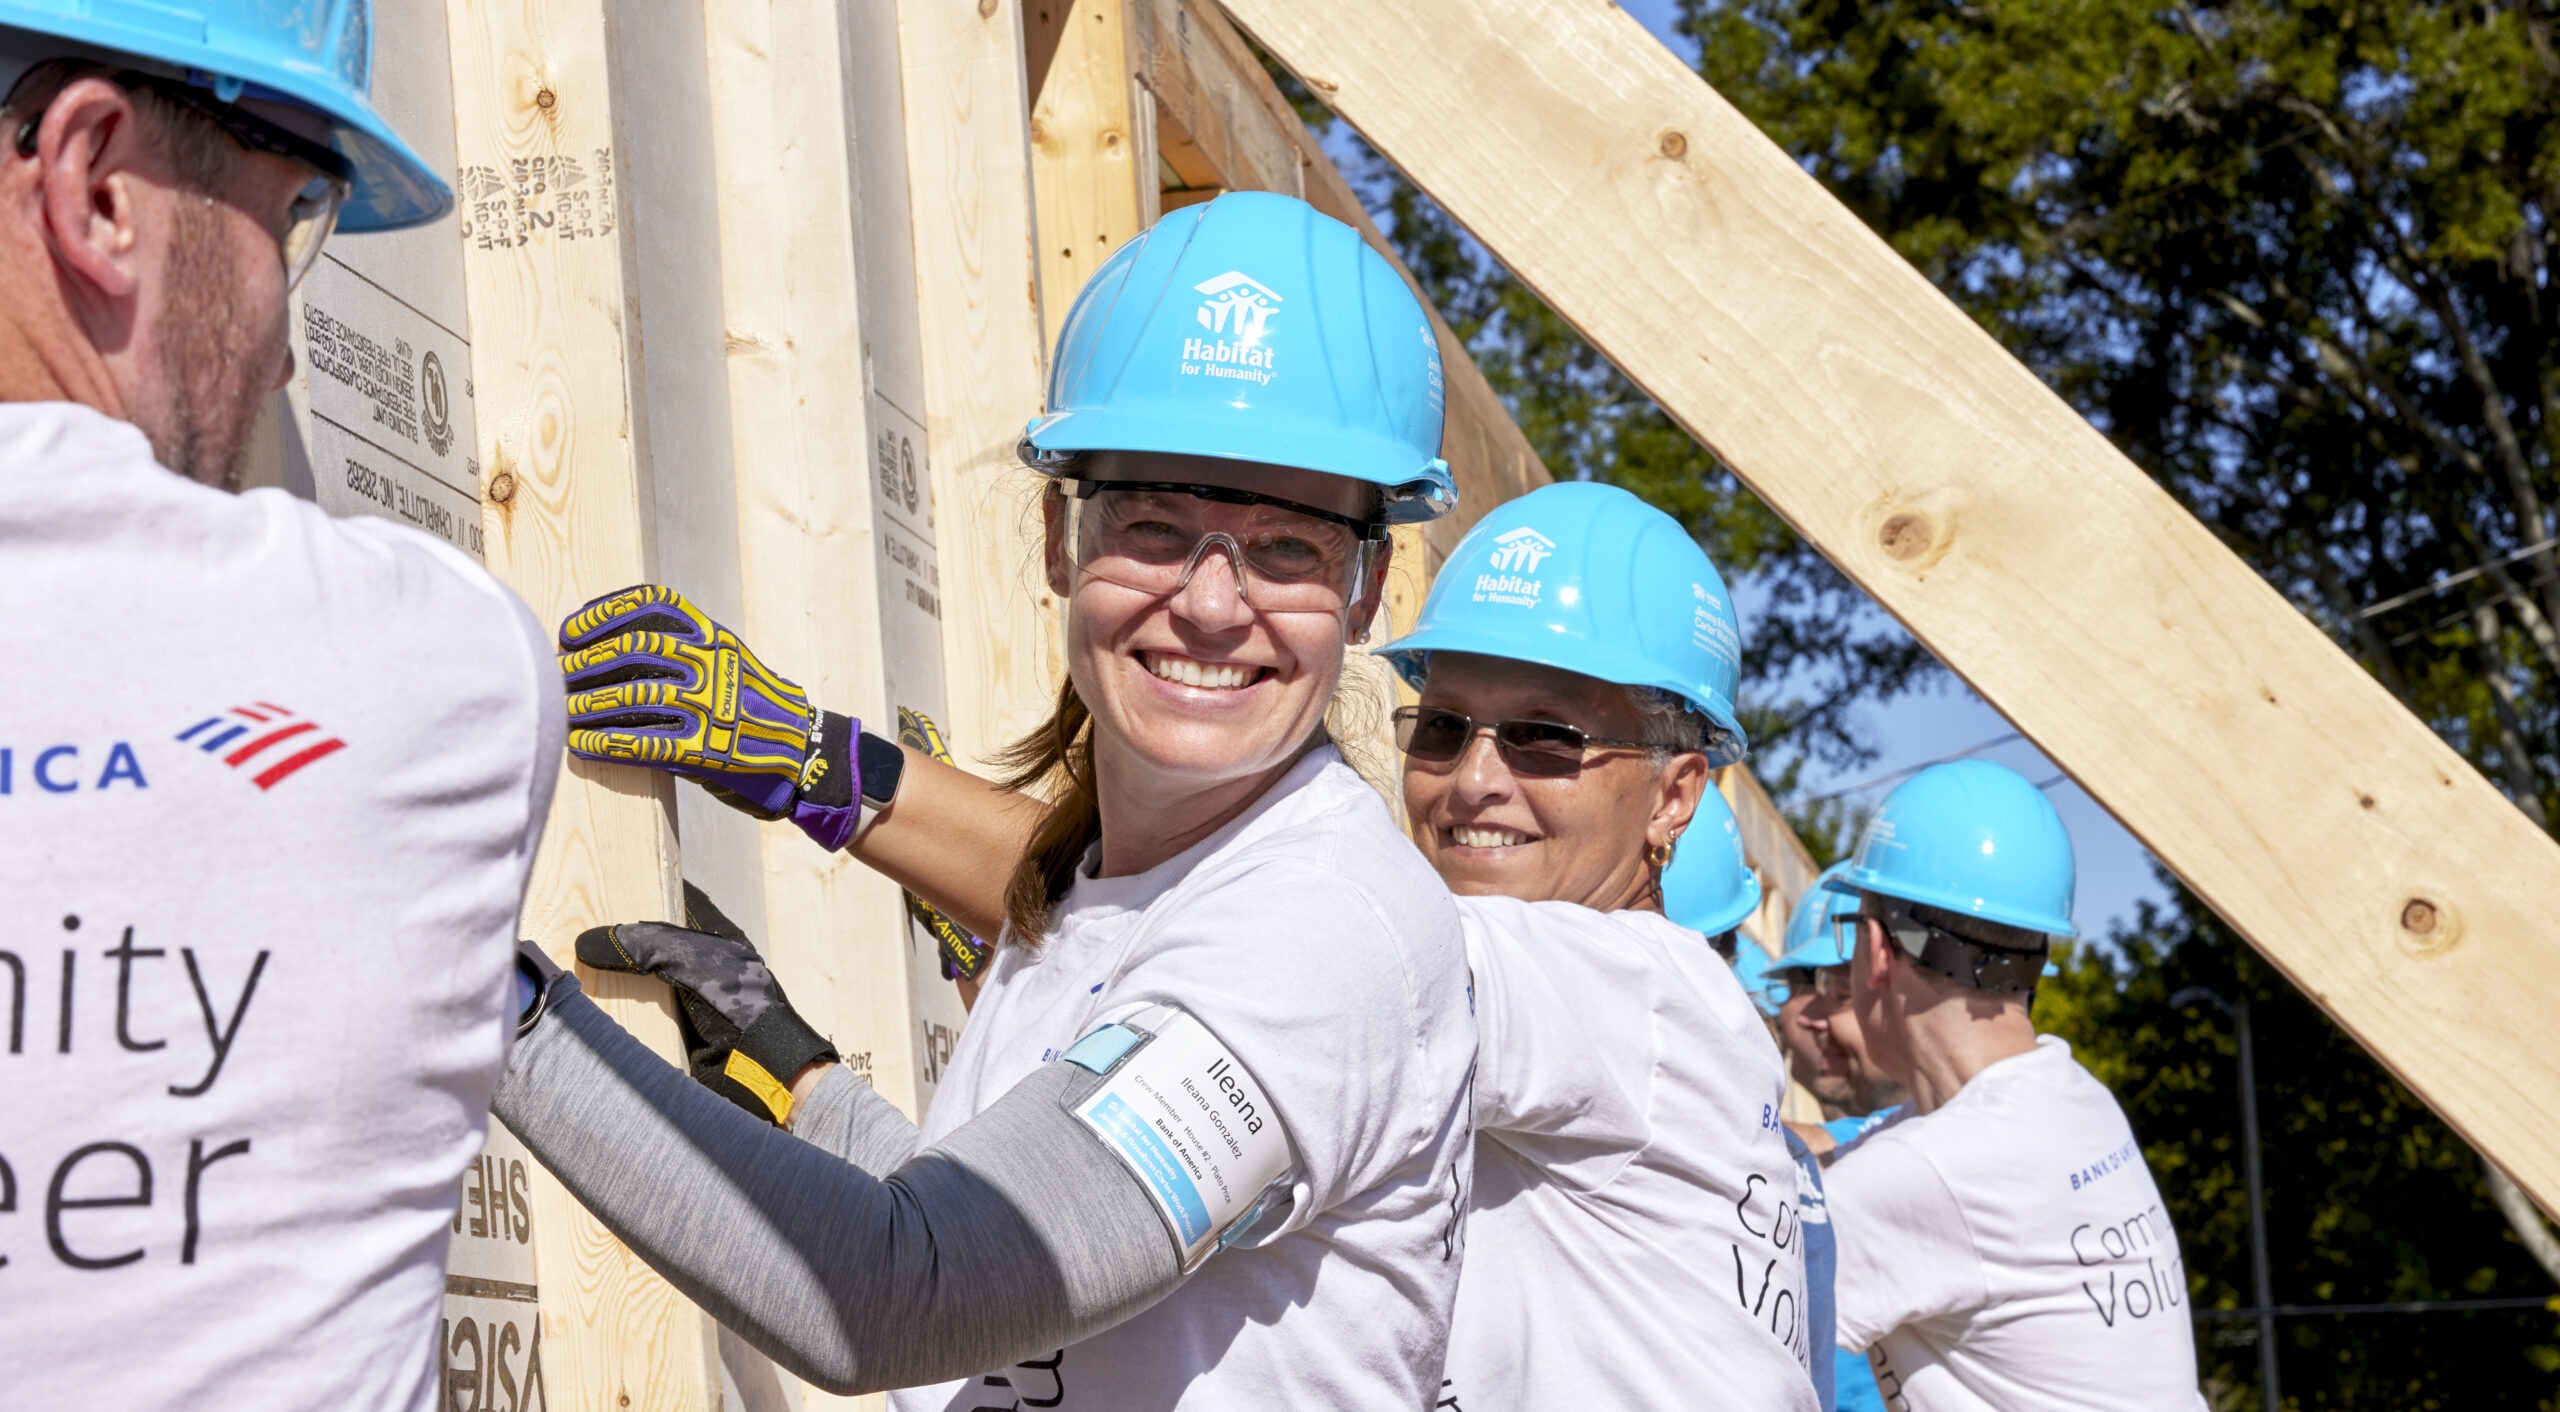 Volunteers from Bank of America help raise a wall at a Habitat for Humanity construction site